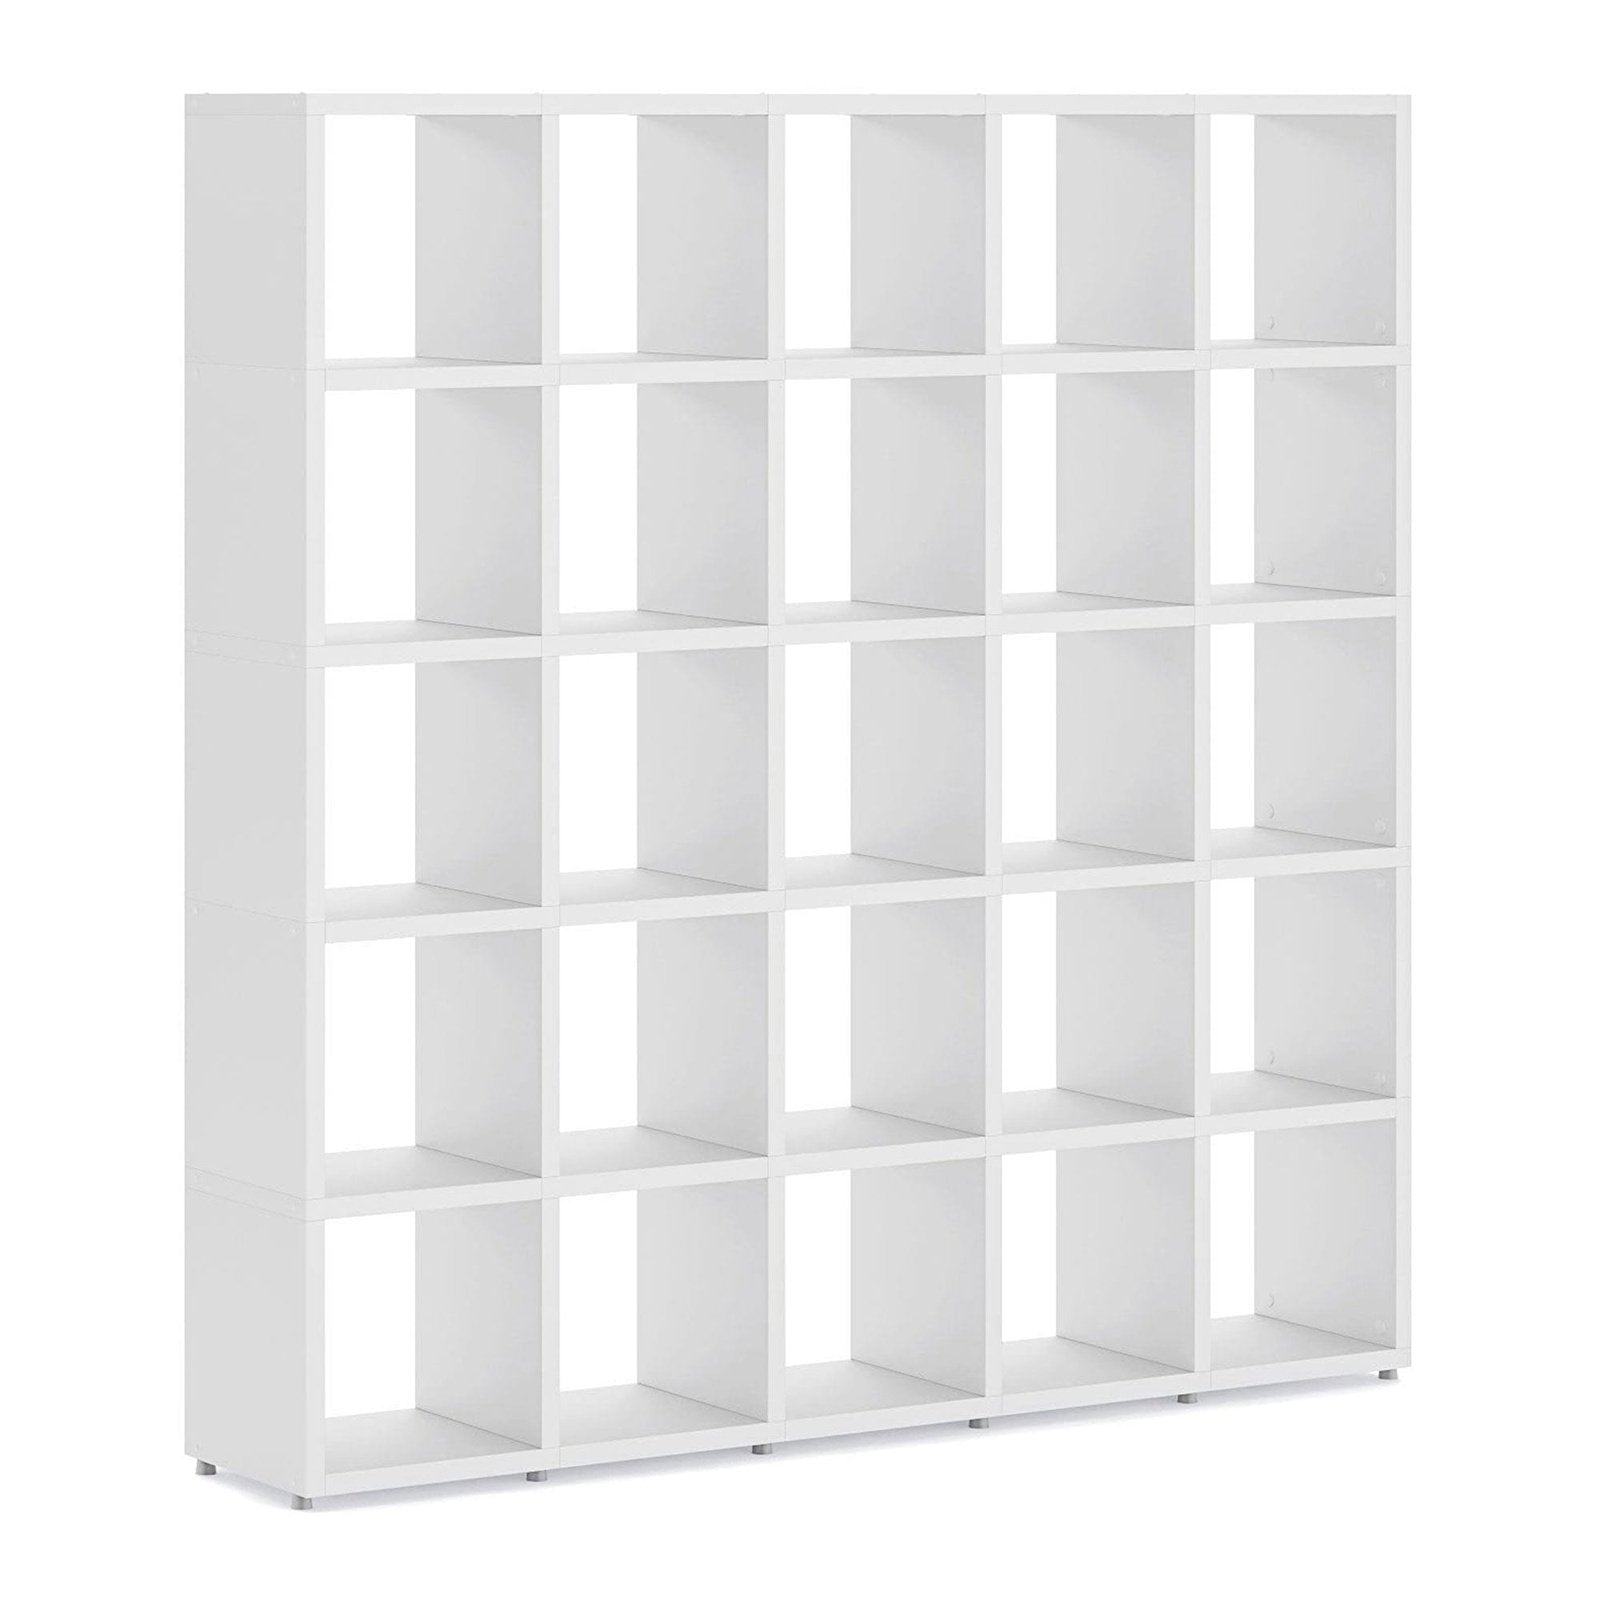 Boon 25x Cube Shelf Storage System - 1830x1810x330mm - Office Products Online